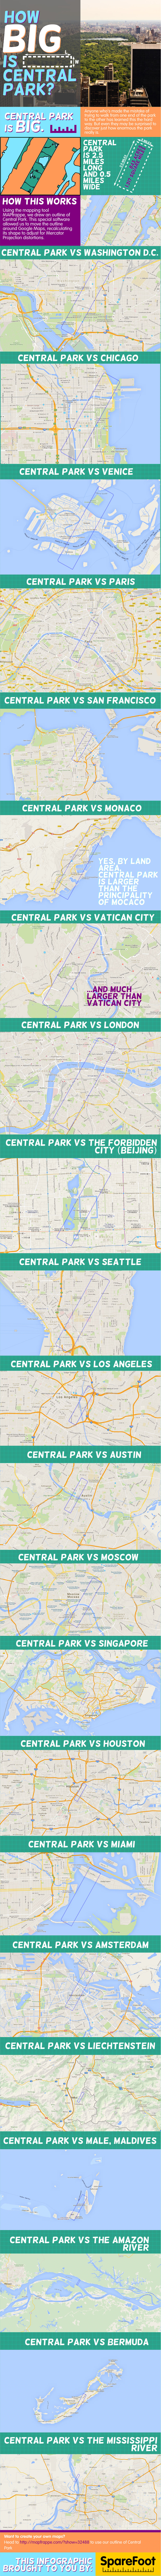 How Big is Central Park in NYC?